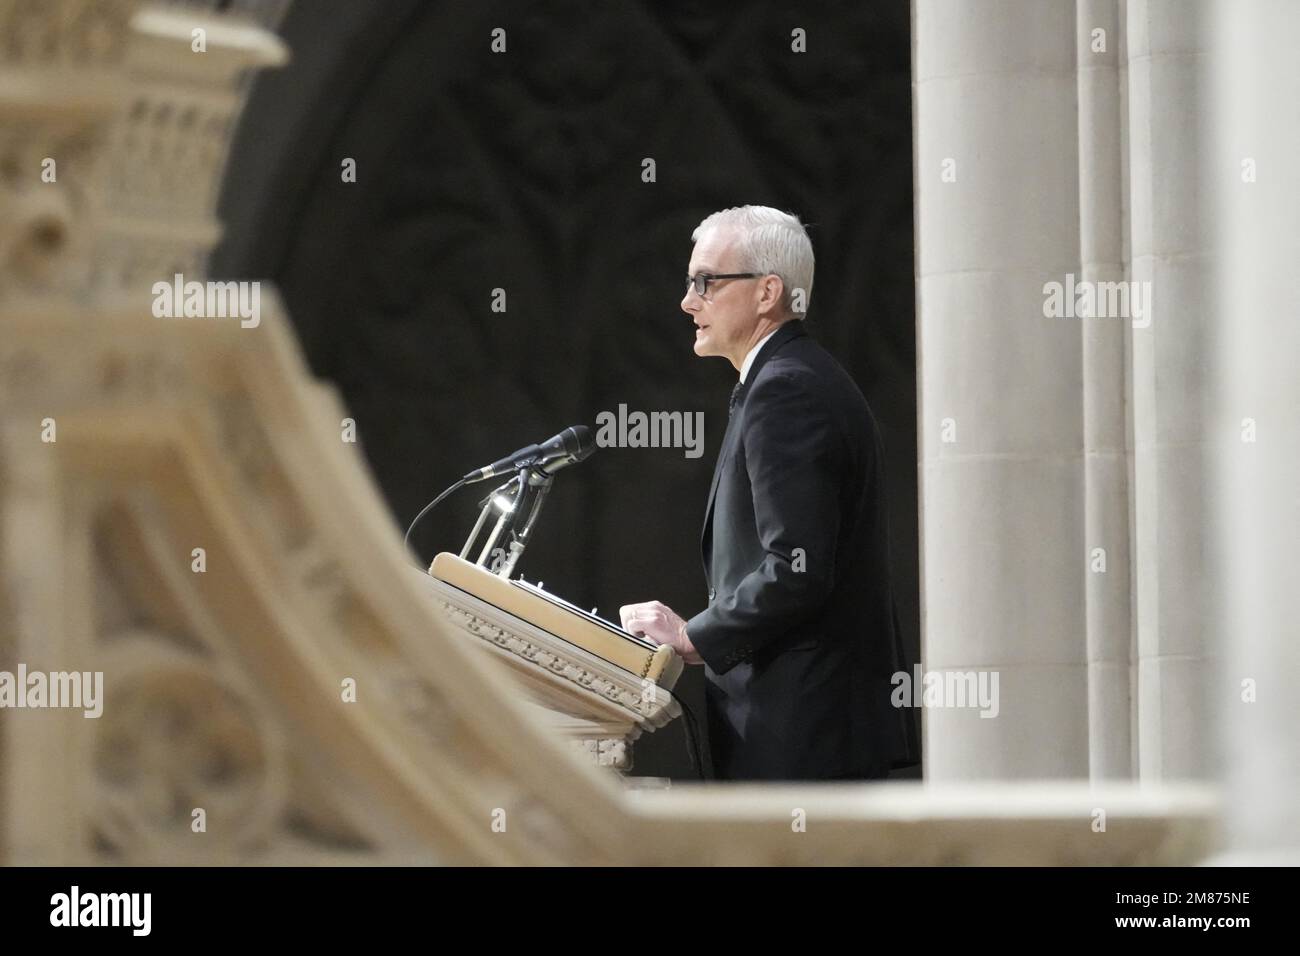 United States Secretary of Veterans Affairs Denis McDonough delivers remarks a memorial service for former US Secretary of Defense Ash Carter in the Washington National Cathedral in Washington, DC on Thursday, January 12, 2023. Credit: Chris Kleponis / Pool via CNP Stock Photo